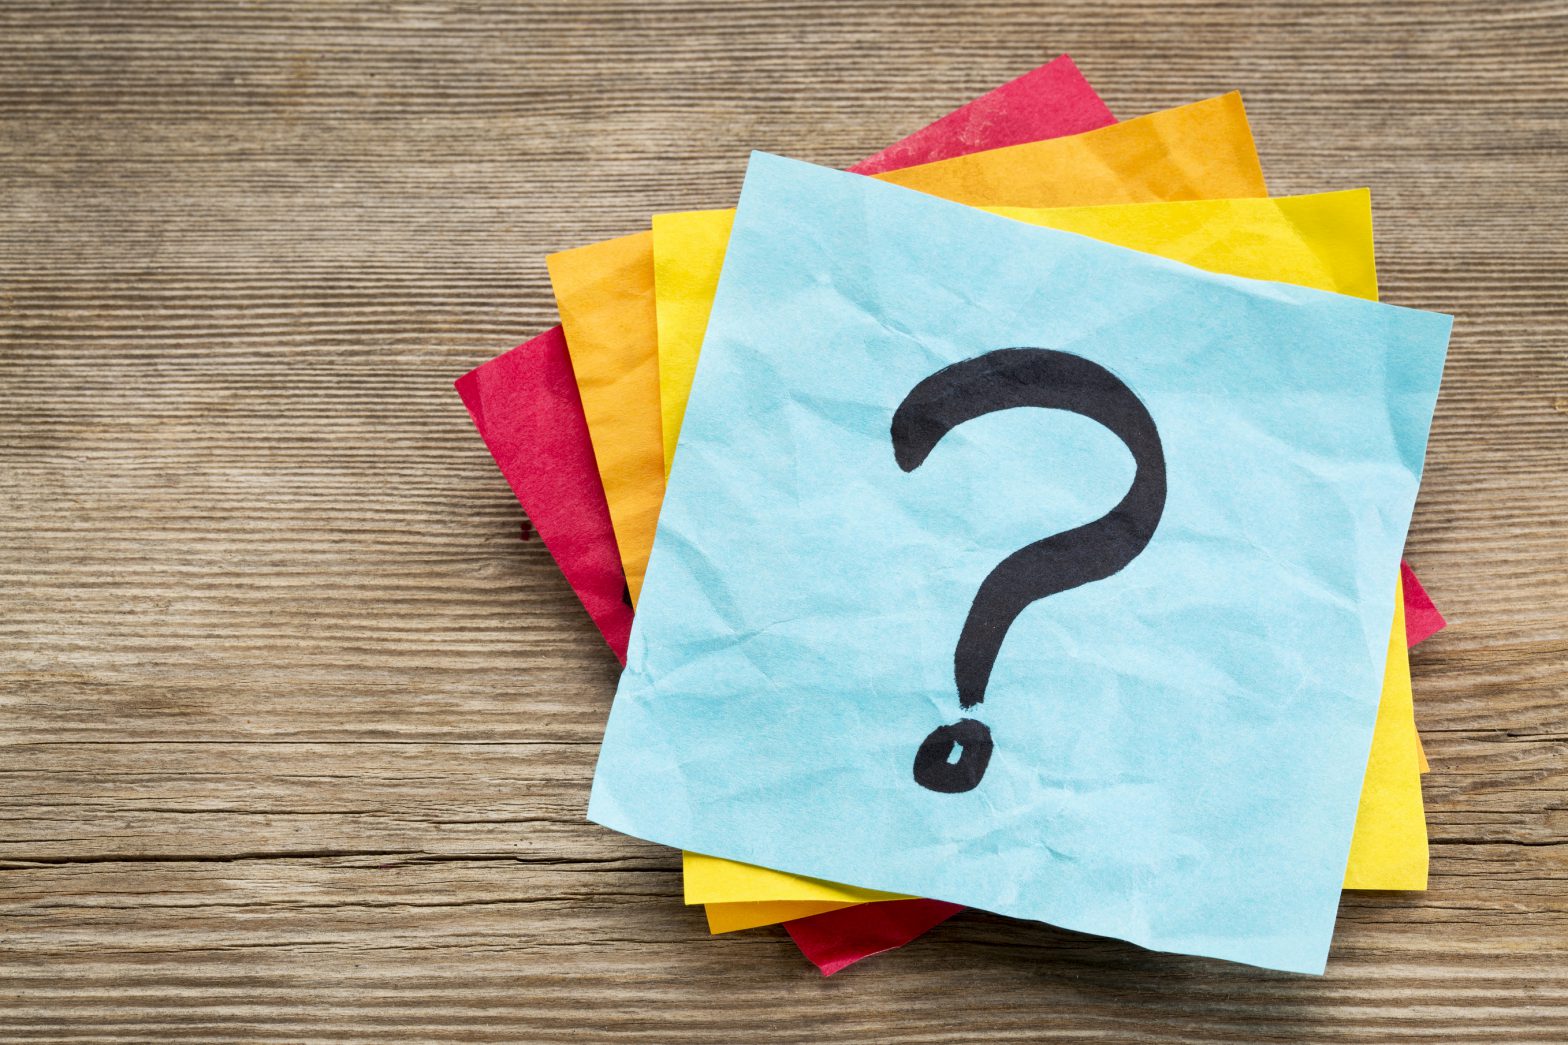 10 Questions to Ask a Content Marketing Agency Before Hiring